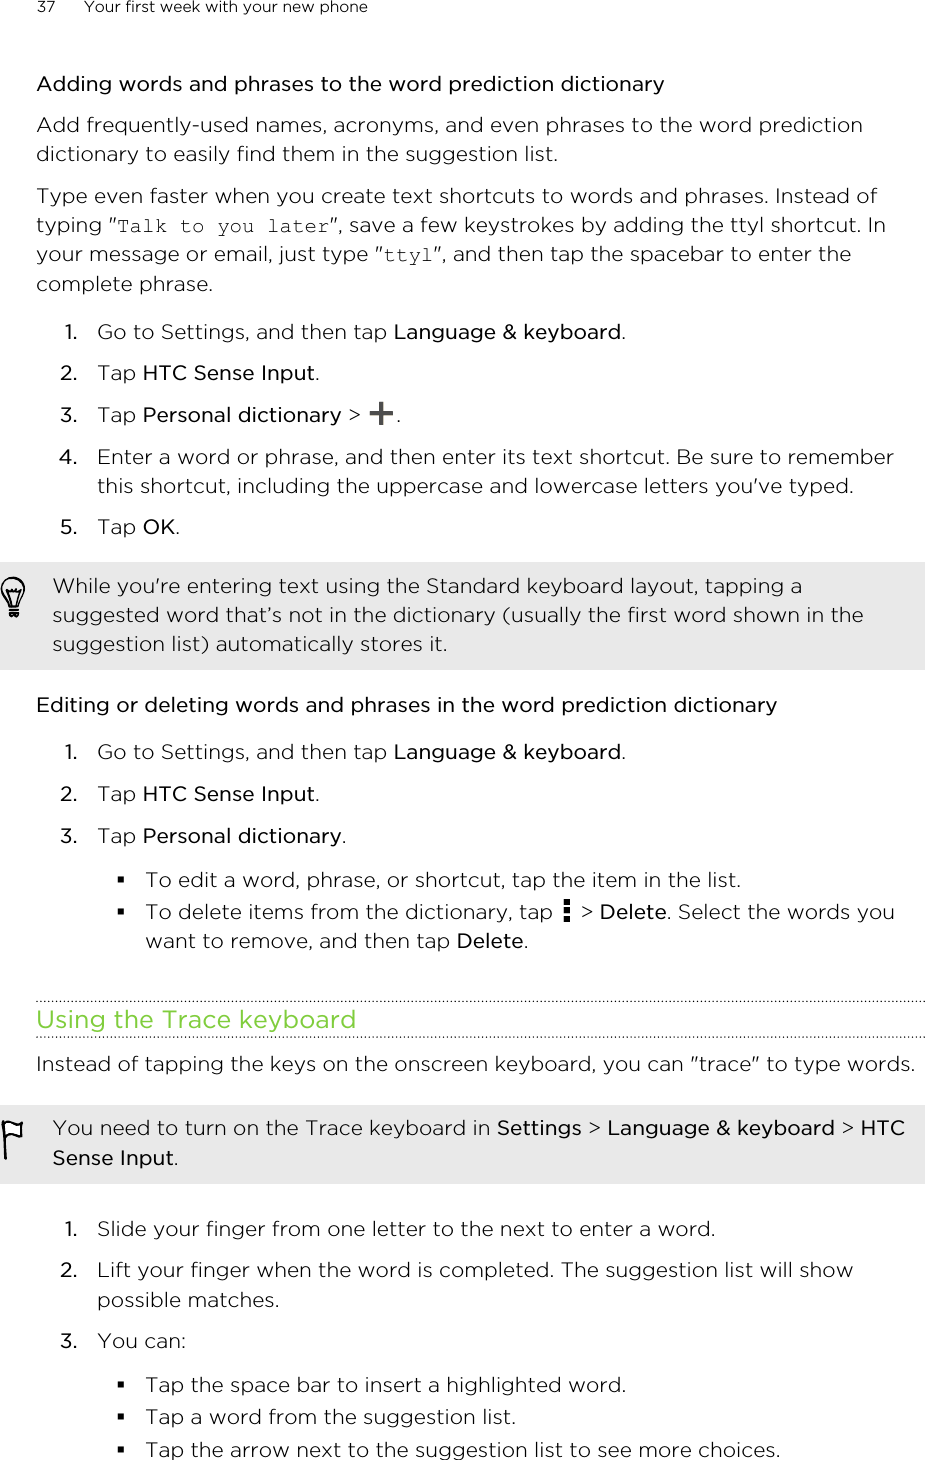 Adding words and phrases to the word prediction dictionaryAdd frequently-used names, acronyms, and even phrases to the word predictiondictionary to easily find them in the suggestion list.Type even faster when you create text shortcuts to words and phrases. Instead oftyping &quot;Talk to you later&quot;, save a few keystrokes by adding the ttyl shortcut. Inyour message or email, just type &quot;ttyl&quot;, and then tap the spacebar to enter thecomplete phrase.1. Go to Settings, and then tap Language &amp; keyboard.2. Tap HTC Sense Input.3. Tap Personal dictionary &gt;  .4. Enter a word or phrase, and then enter its text shortcut. Be sure to rememberthis shortcut, including the uppercase and lowercase letters you&apos;ve typed.5. Tap OK.While you&apos;re entering text using the Standard keyboard layout, tapping asuggested word that’s not in the dictionary (usually the first word shown in thesuggestion list) automatically stores it.Editing or deleting words and phrases in the word prediction dictionary1. Go to Settings, and then tap Language &amp; keyboard.2. Tap HTC Sense Input.3. Tap Personal dictionary.§To edit a word, phrase, or shortcut, tap the item in the list.§To delete items from the dictionary, tap   &gt; Delete. Select the words youwant to remove, and then tap Delete.Using the Trace keyboardInstead of tapping the keys on the onscreen keyboard, you can &quot;trace&quot; to type words.You need to turn on the Trace keyboard in Settings &gt; Language &amp; keyboard &gt; HTCSense Input.1. Slide your finger from one letter to the next to enter a word.2. Lift your finger when the word is completed. The suggestion list will showpossible matches.3. You can:§Tap the space bar to insert a highlighted word.§Tap a word from the suggestion list.§Tap the arrow next to the suggestion list to see more choices.37 Your first week with your new phone